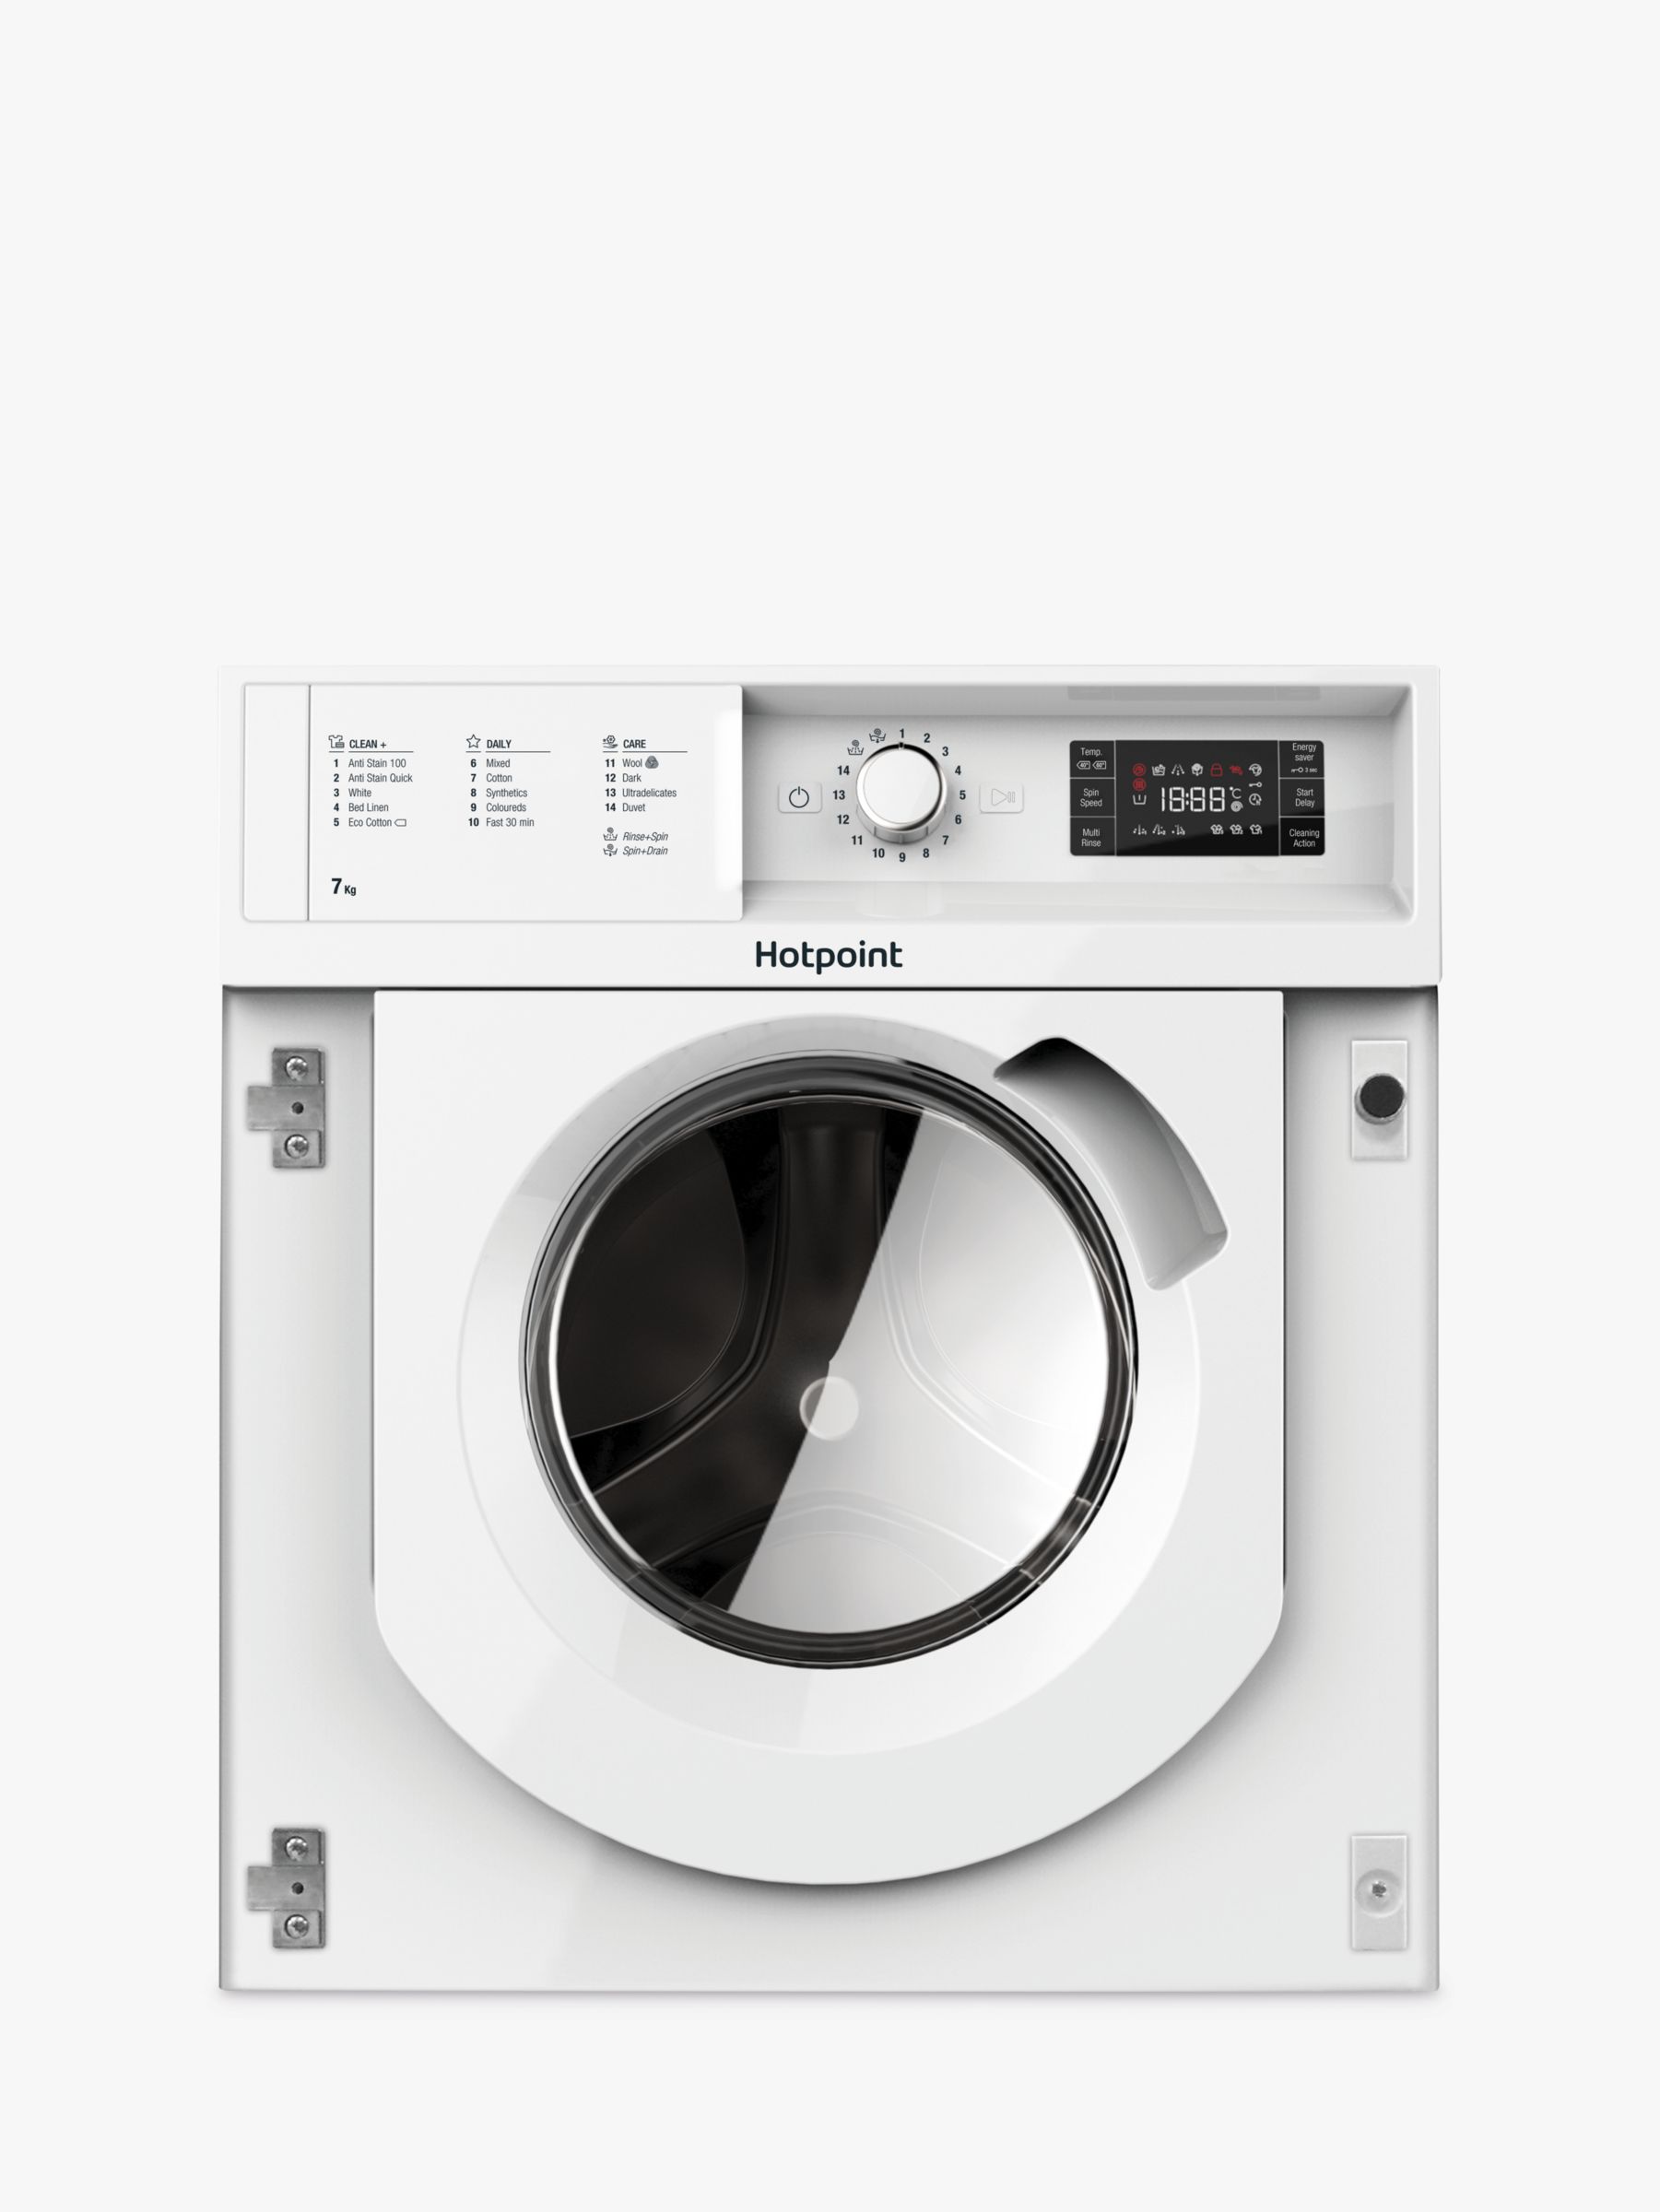 Hotpoint WMHG71284UK Integrated Washing Machine, 7kg Load, 1200rpm, A+++ Energy Rating, White at ...